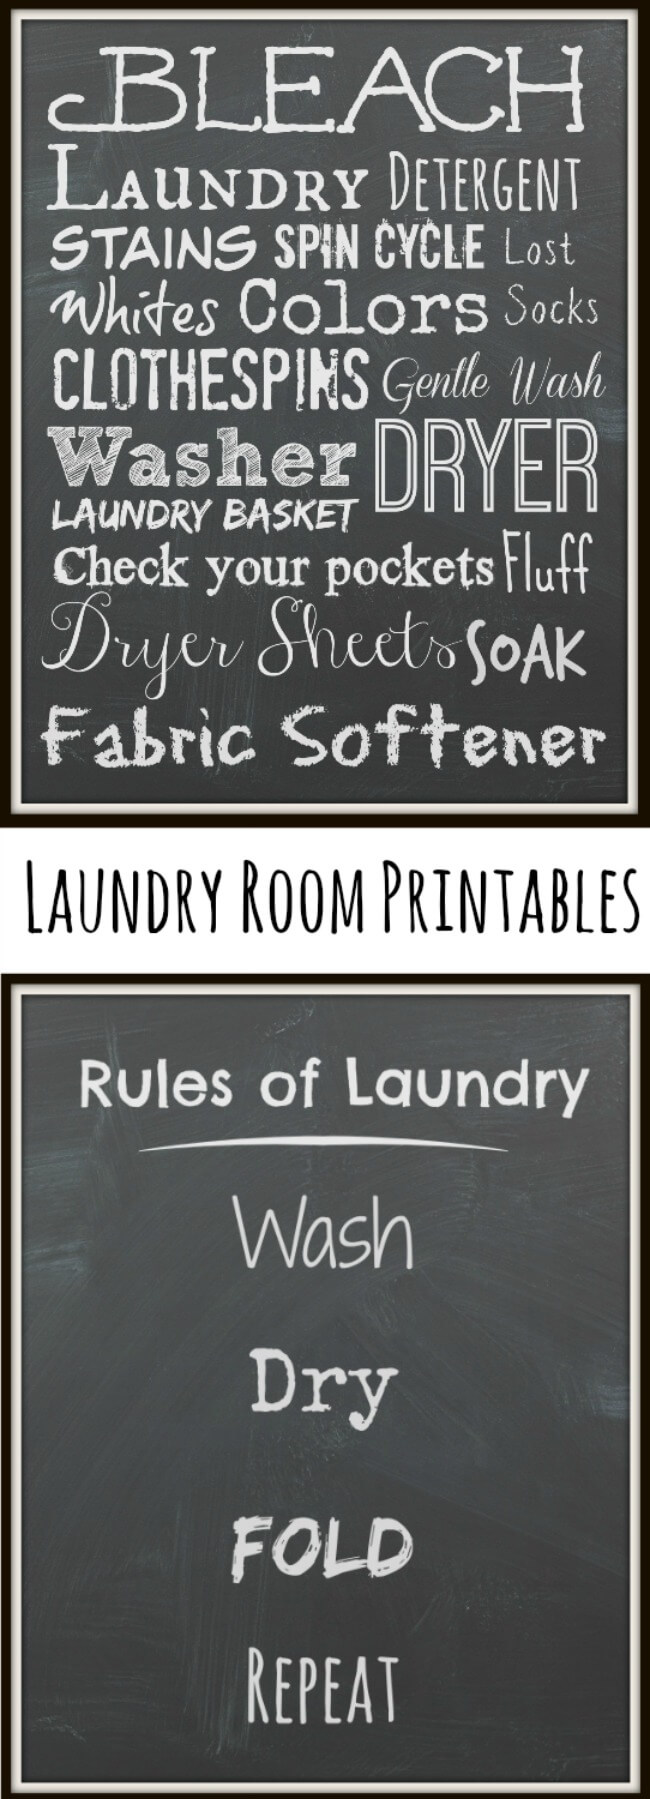 P&G Free & Clean Laundry Products - for sensitive skin. FREE Chalkboard Laundry Printables! #IC #ad #SecondSkincare | The TipToe Fairys